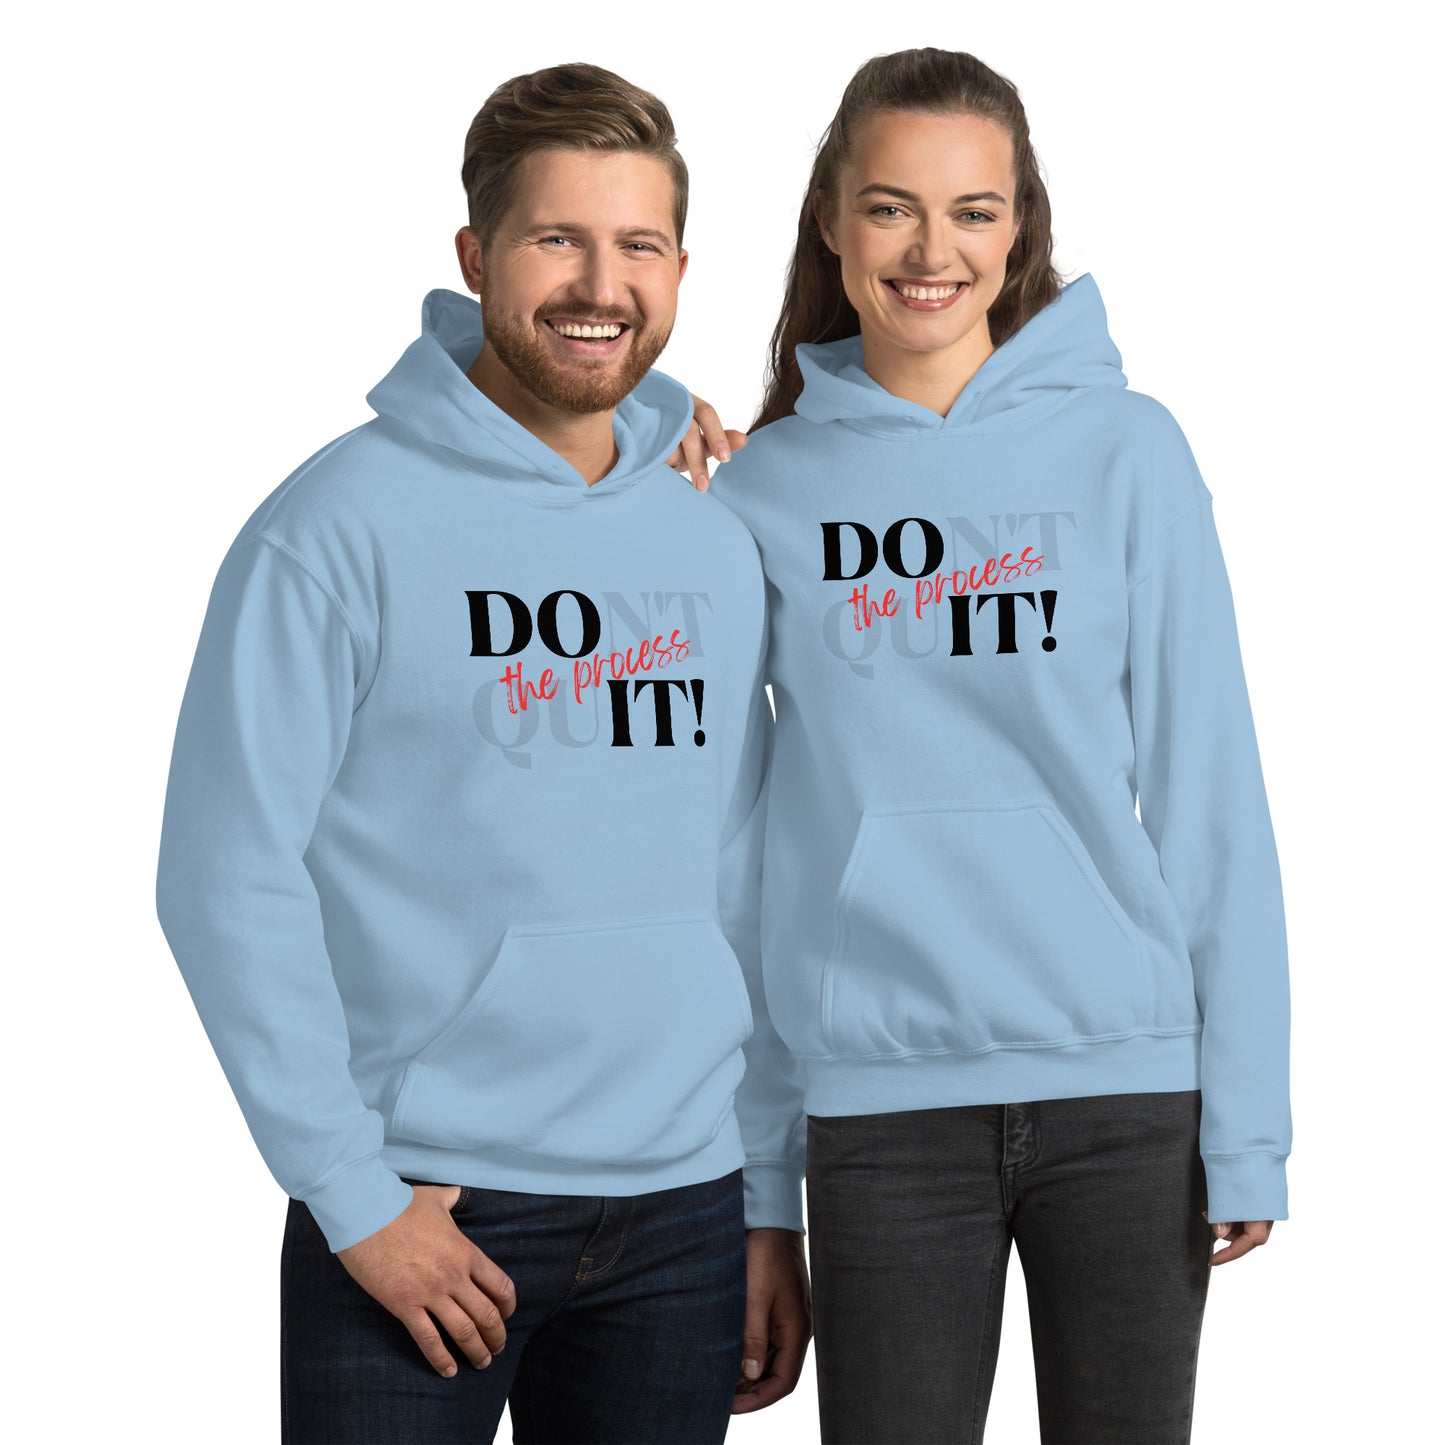 DOn't quIT! the process Unisex Hoodie